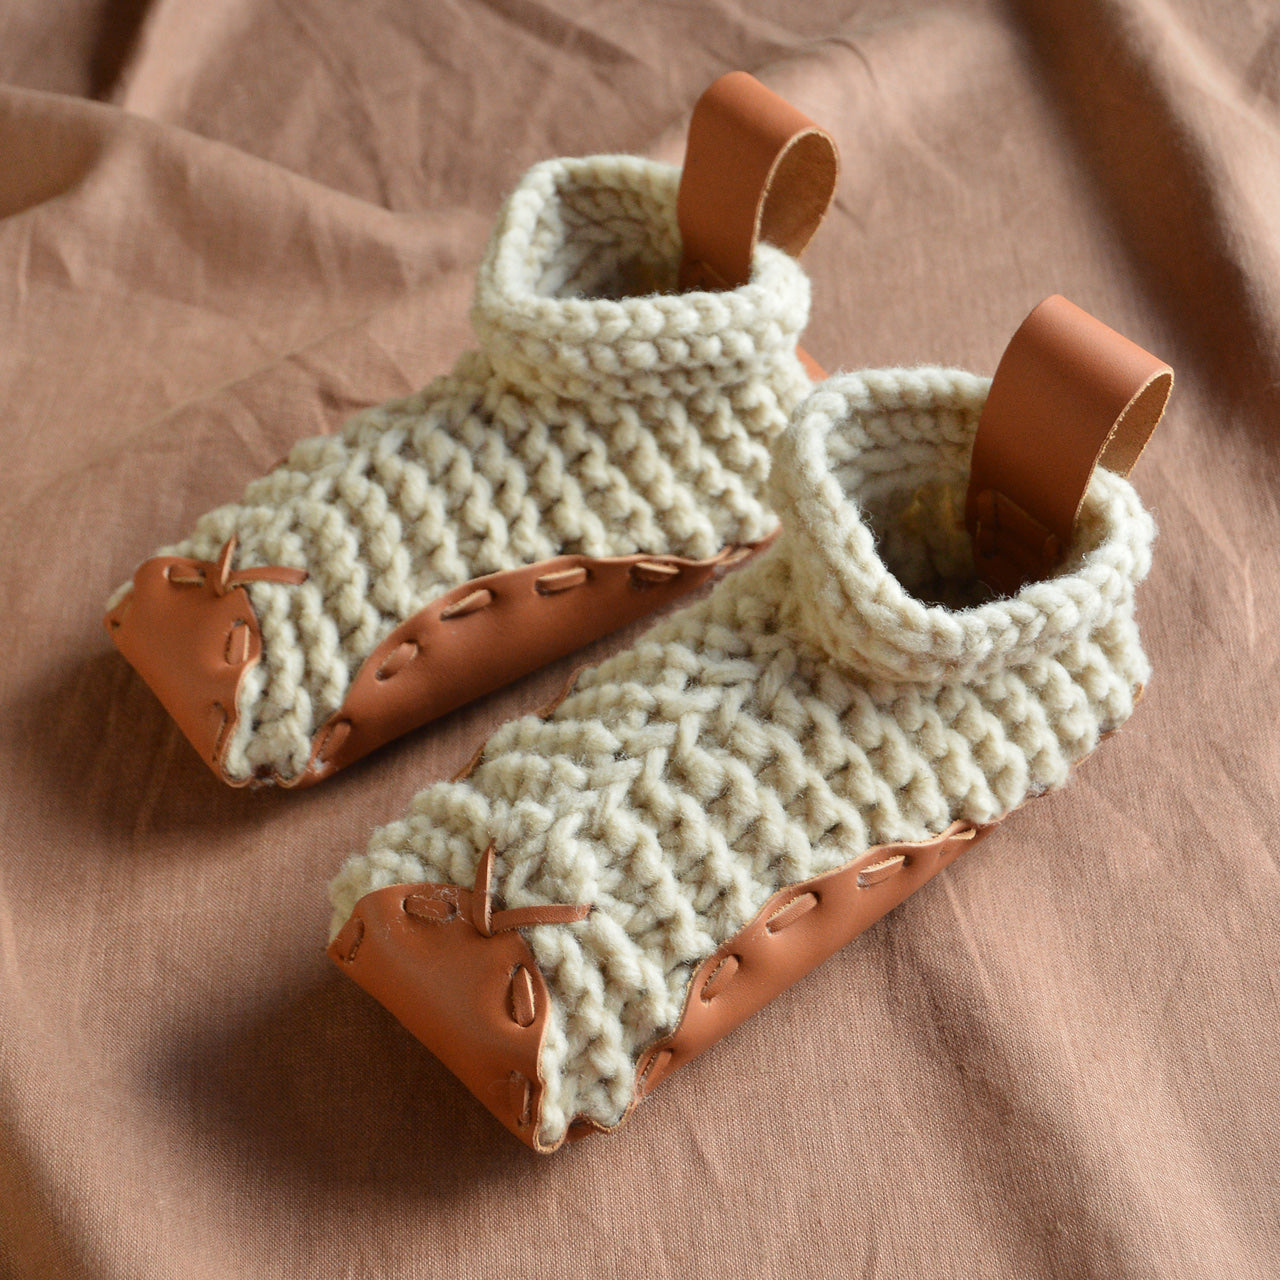 Chilote Slippers - Wool & Veg Tanned Leather - Tan (Adults 34-46)